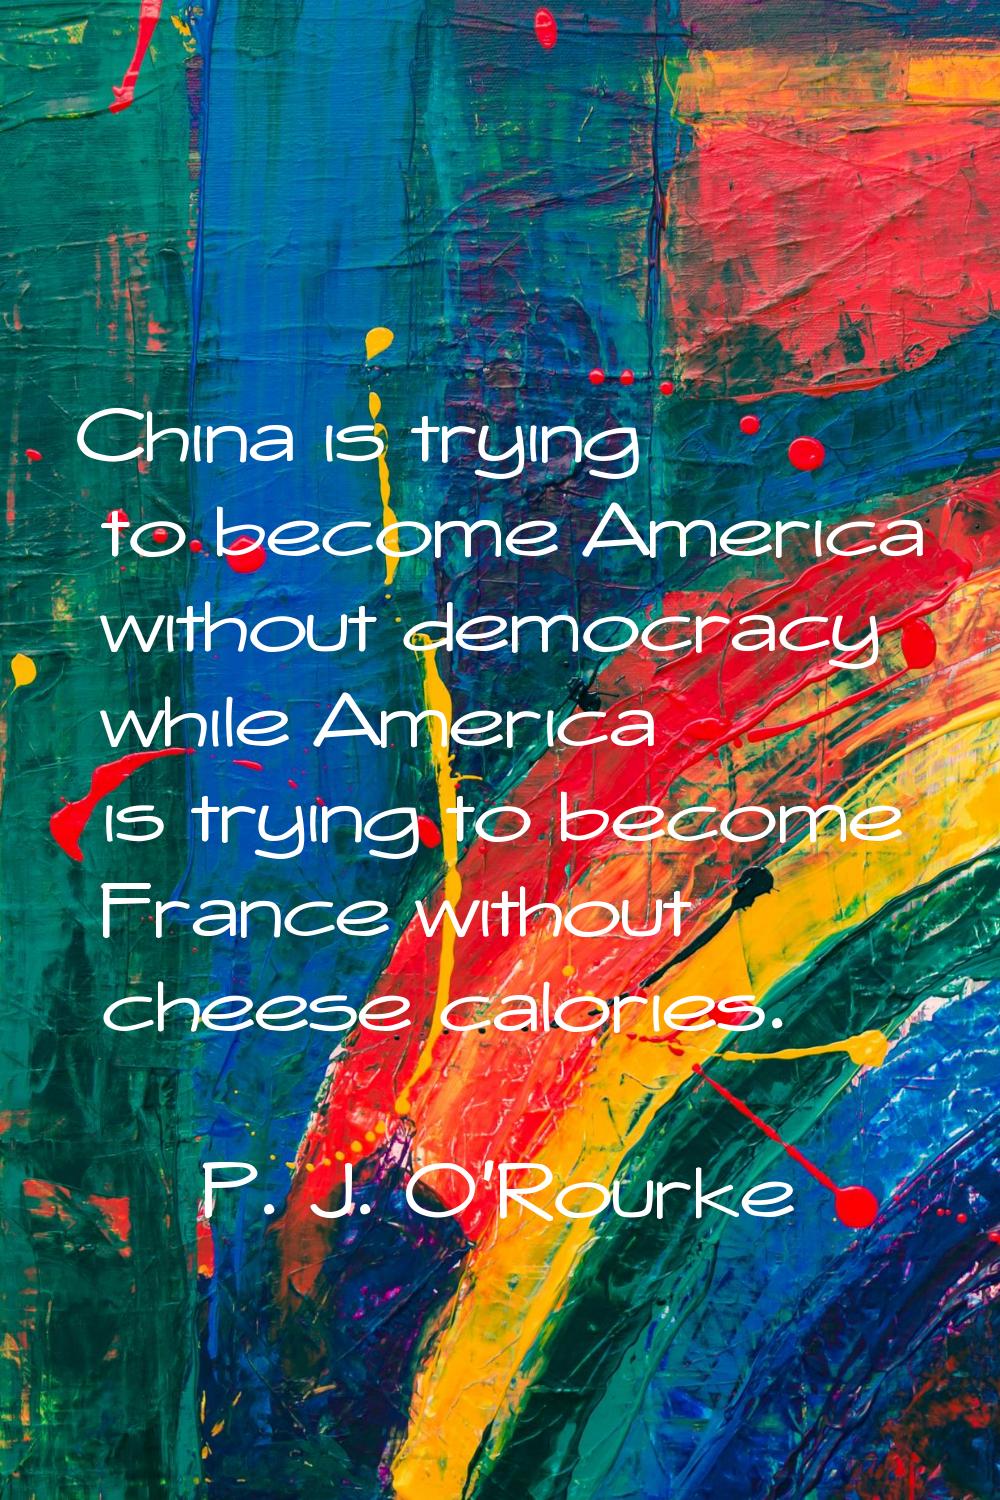 China is trying to become America without democracy while America is trying to become France withou